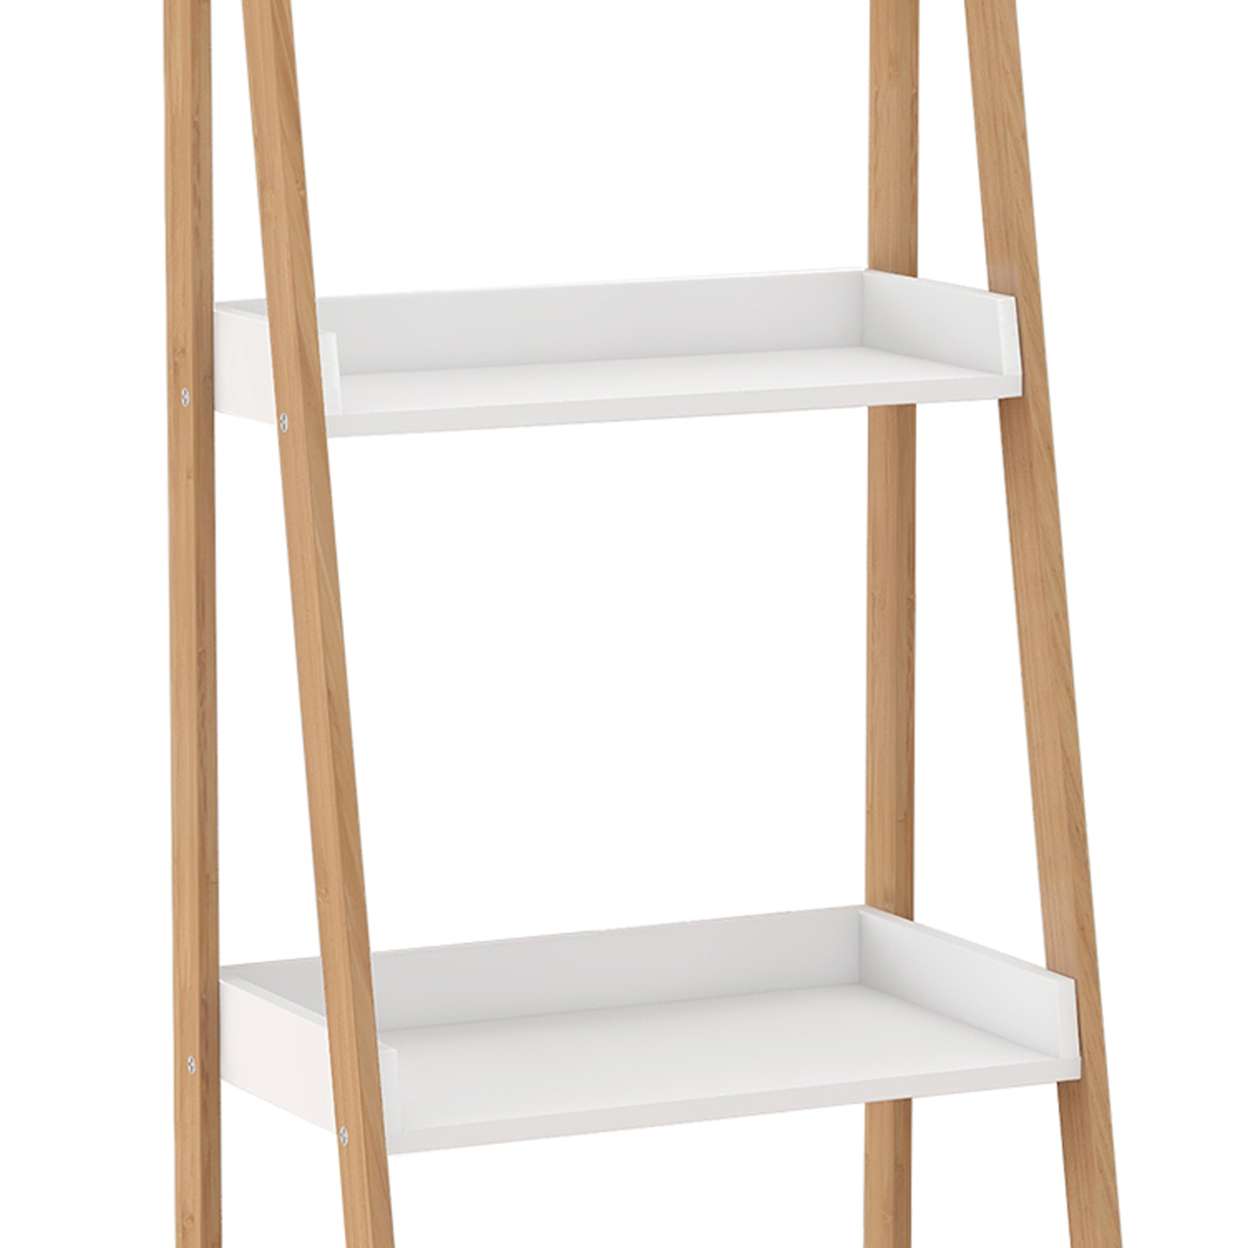 4 Tier Bookshelf With Ladder Style And Raised Edges, White And Brown- Saltoro Sherpi